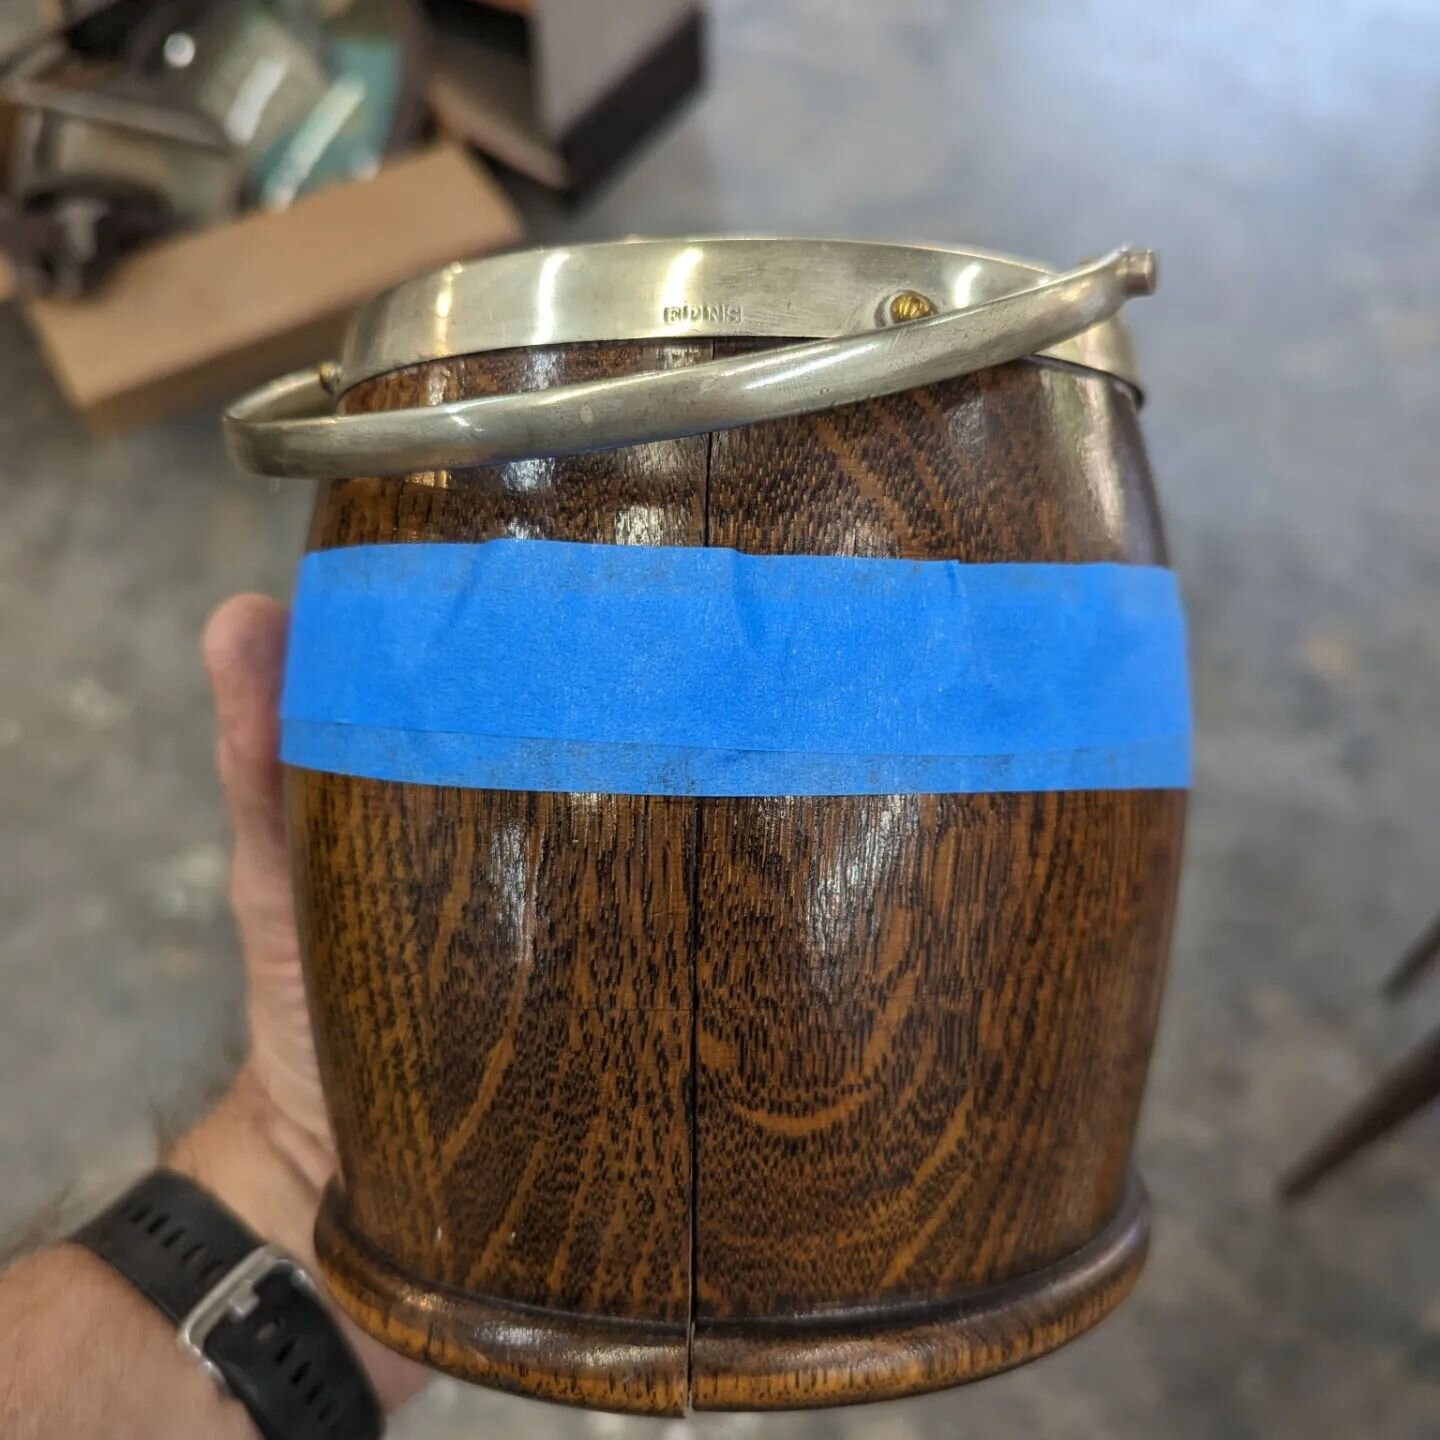 Repair of antique English oak biscuit barrel which retains its original porcelain liner and is banded and decorated with silver plate.

#jeffjohnsonrestorations #jjrestorations #antiques #uk #instacool